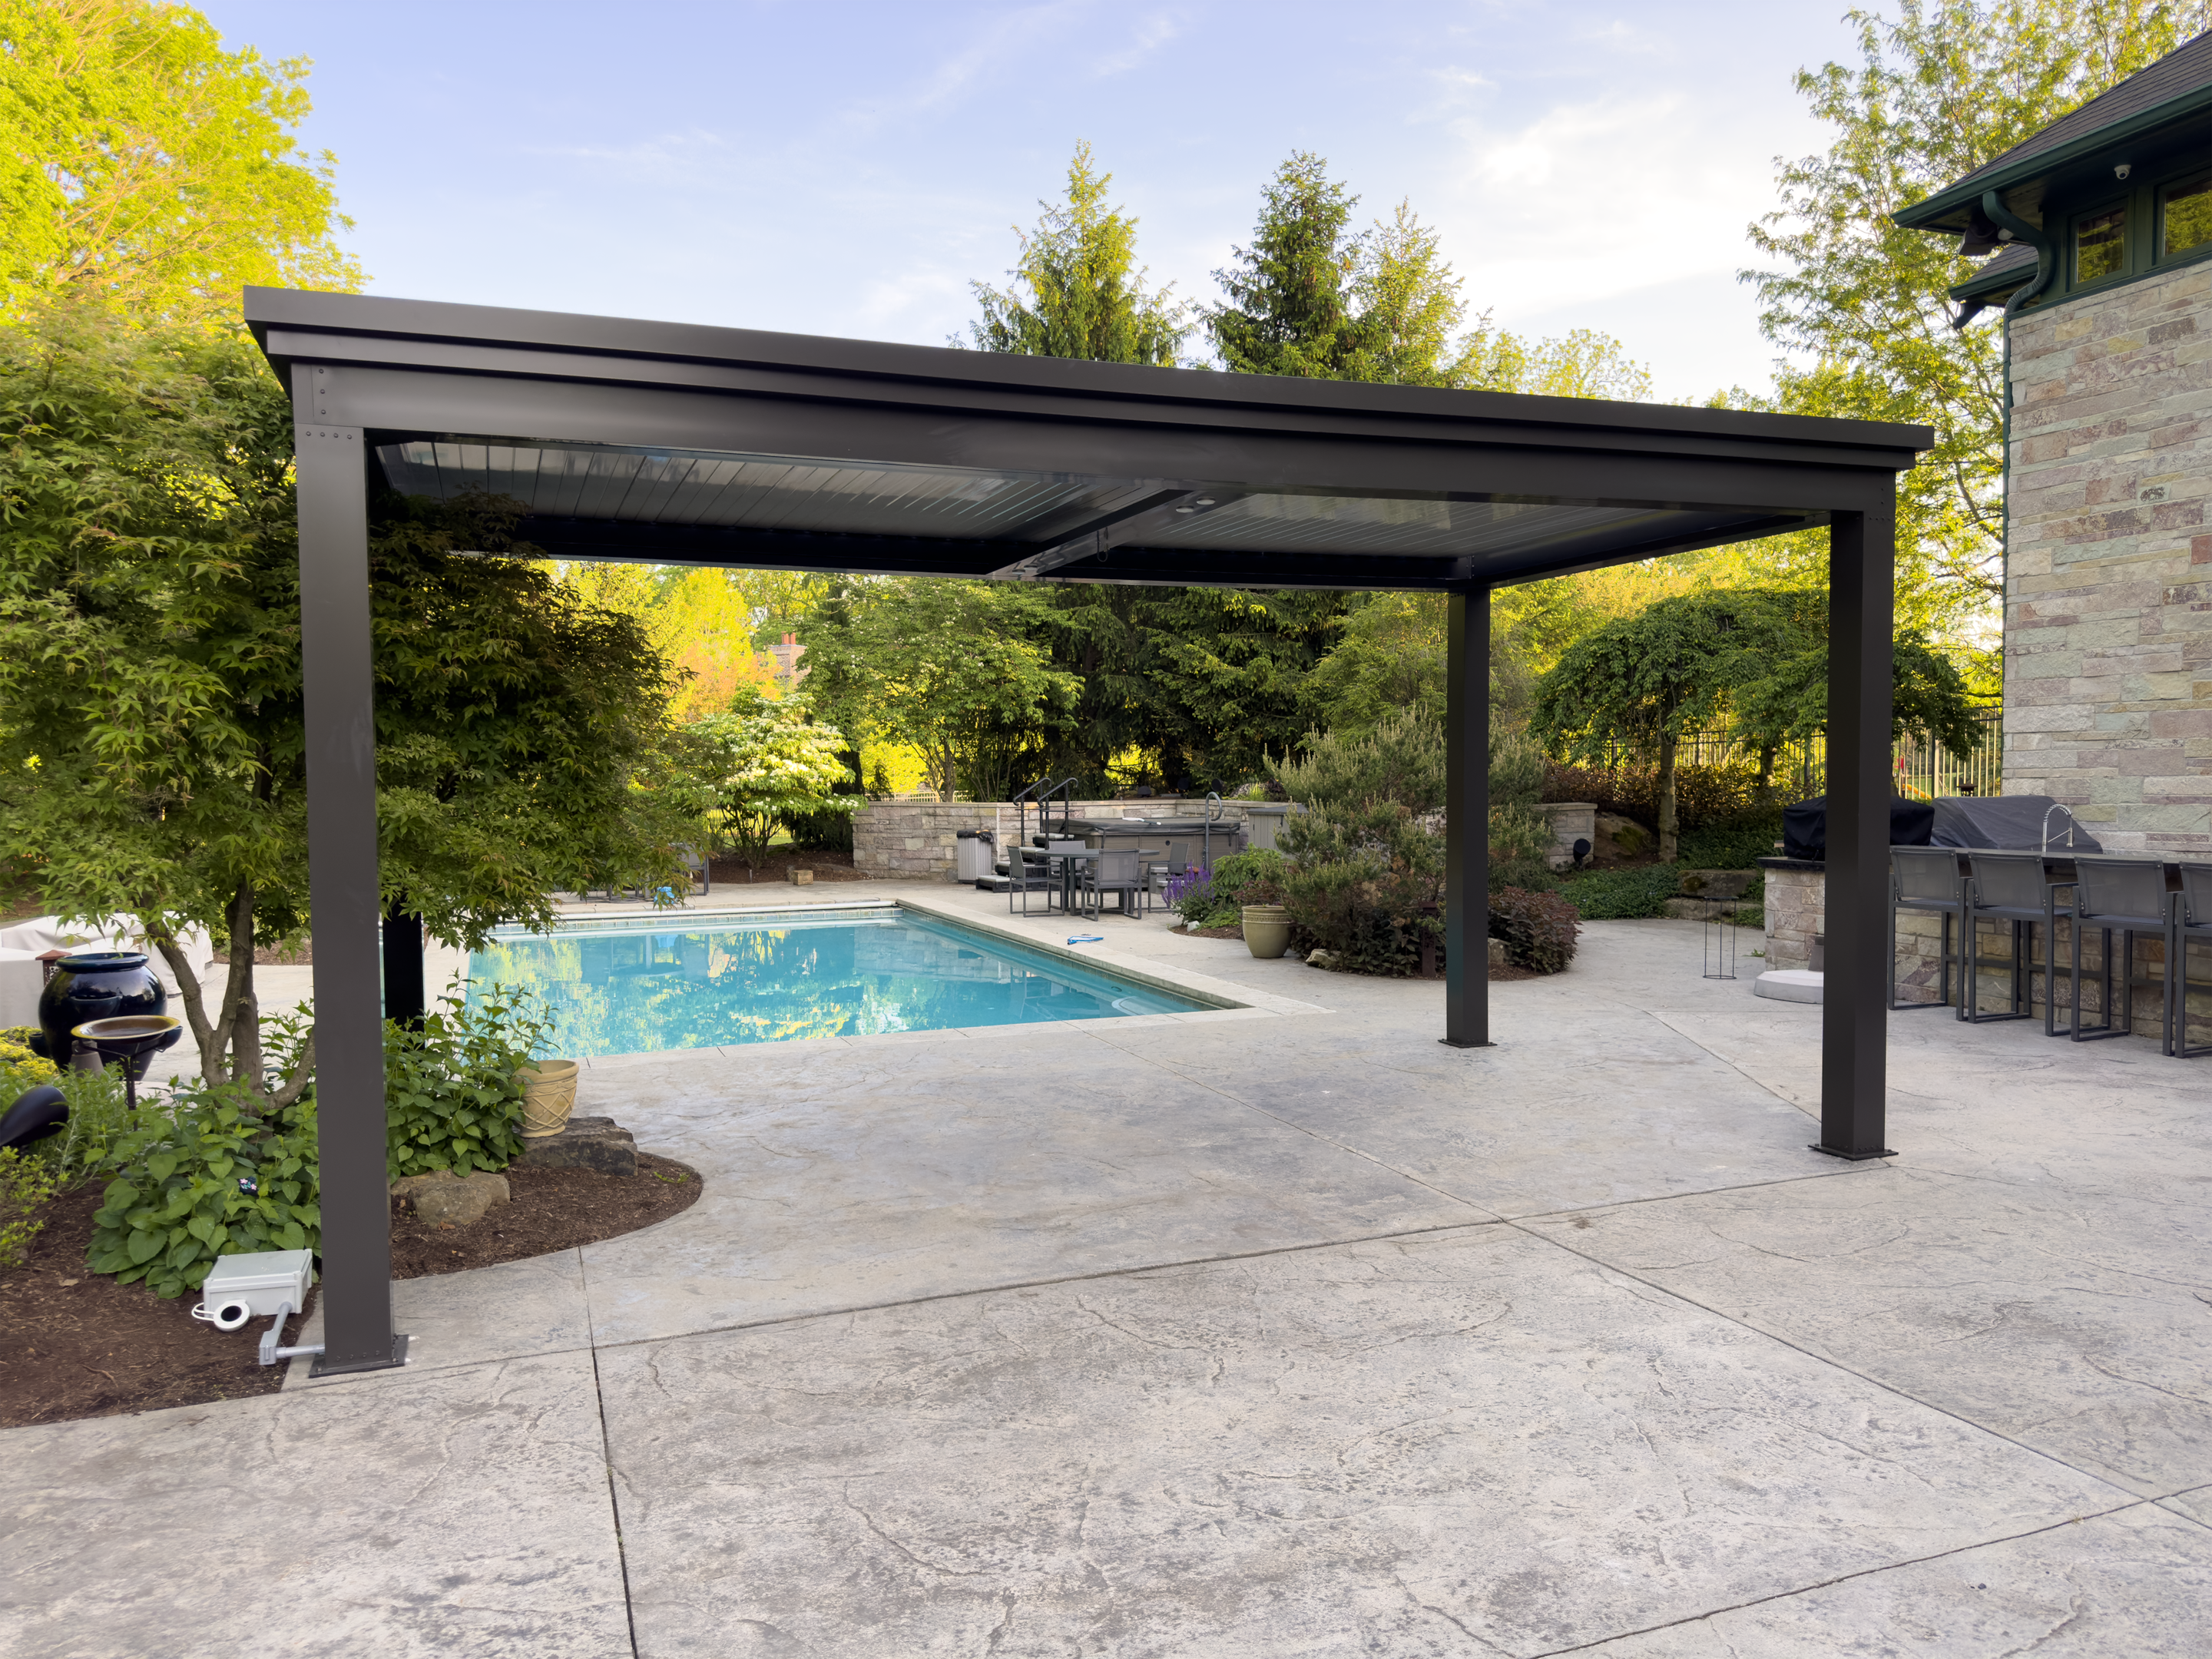 aluminum pergola with proud pergola size able to withstand extreme weather chasing the right pergola made easy